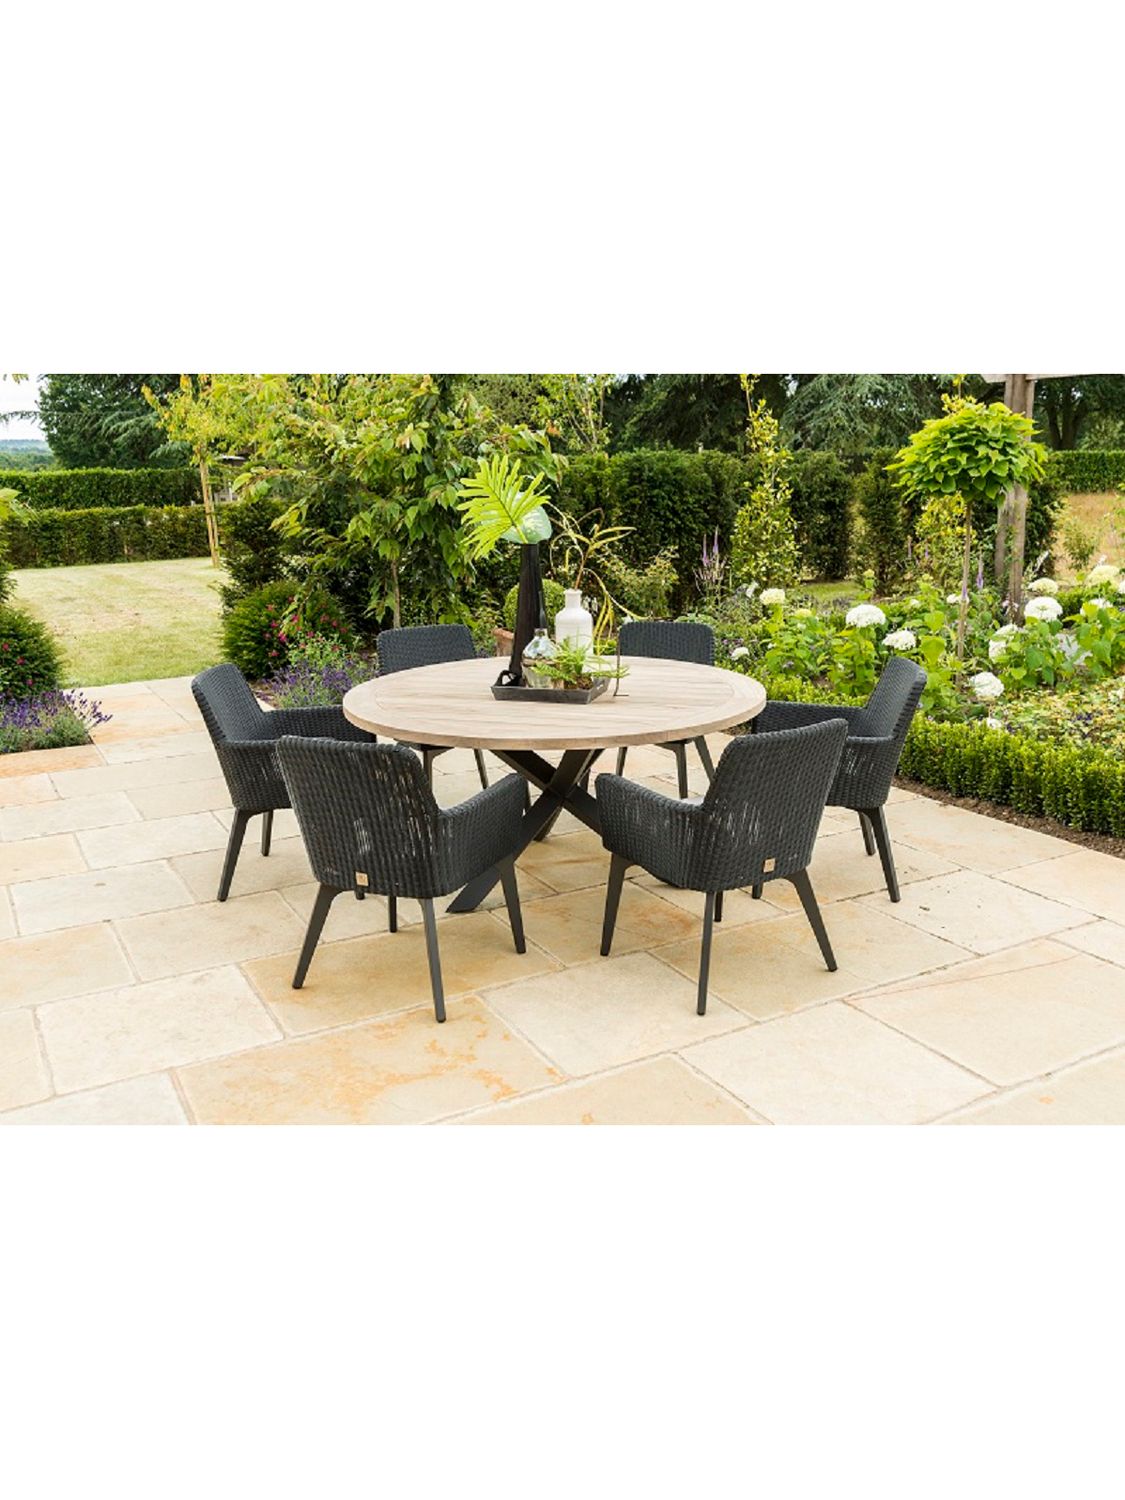 Photo of 4 seasons outdoor lisboa 6-seater round garden dining table & chairs set polyloom anthracite